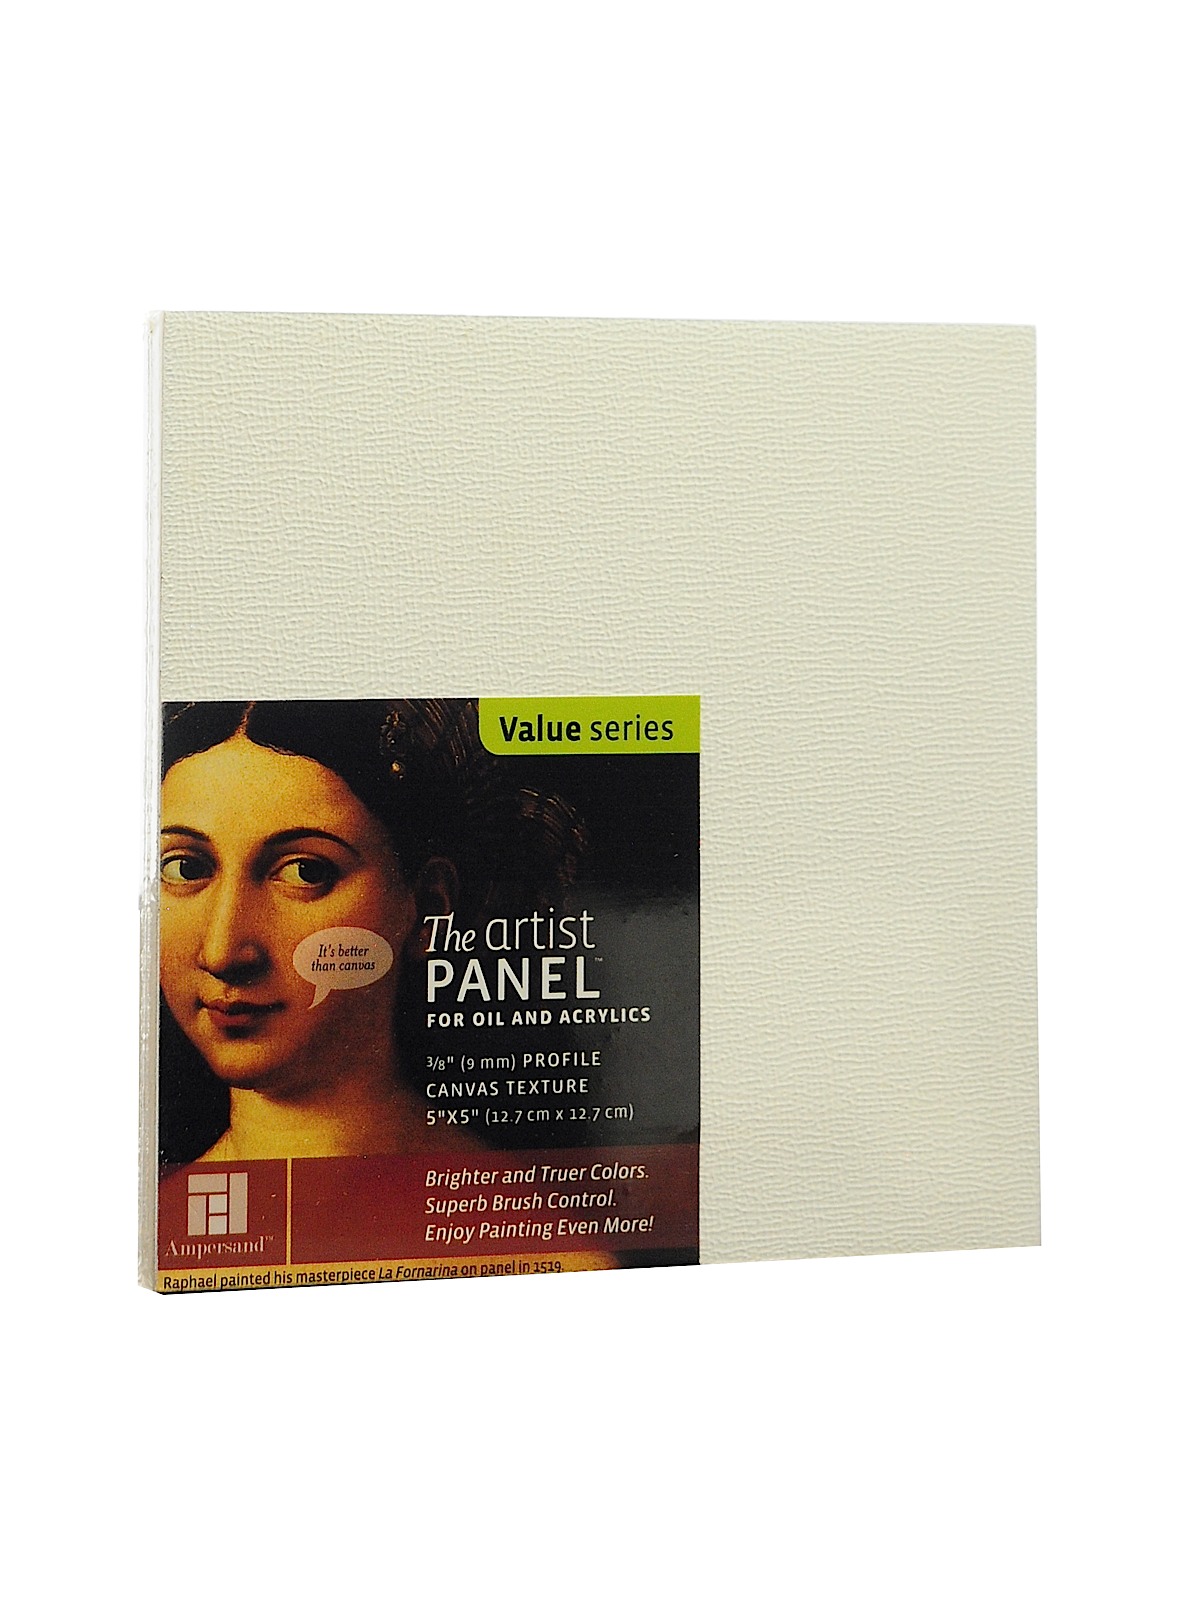 The Artist Panel Canvas Texture Flat Profile 5 In. X 5 In. 3 8 In.